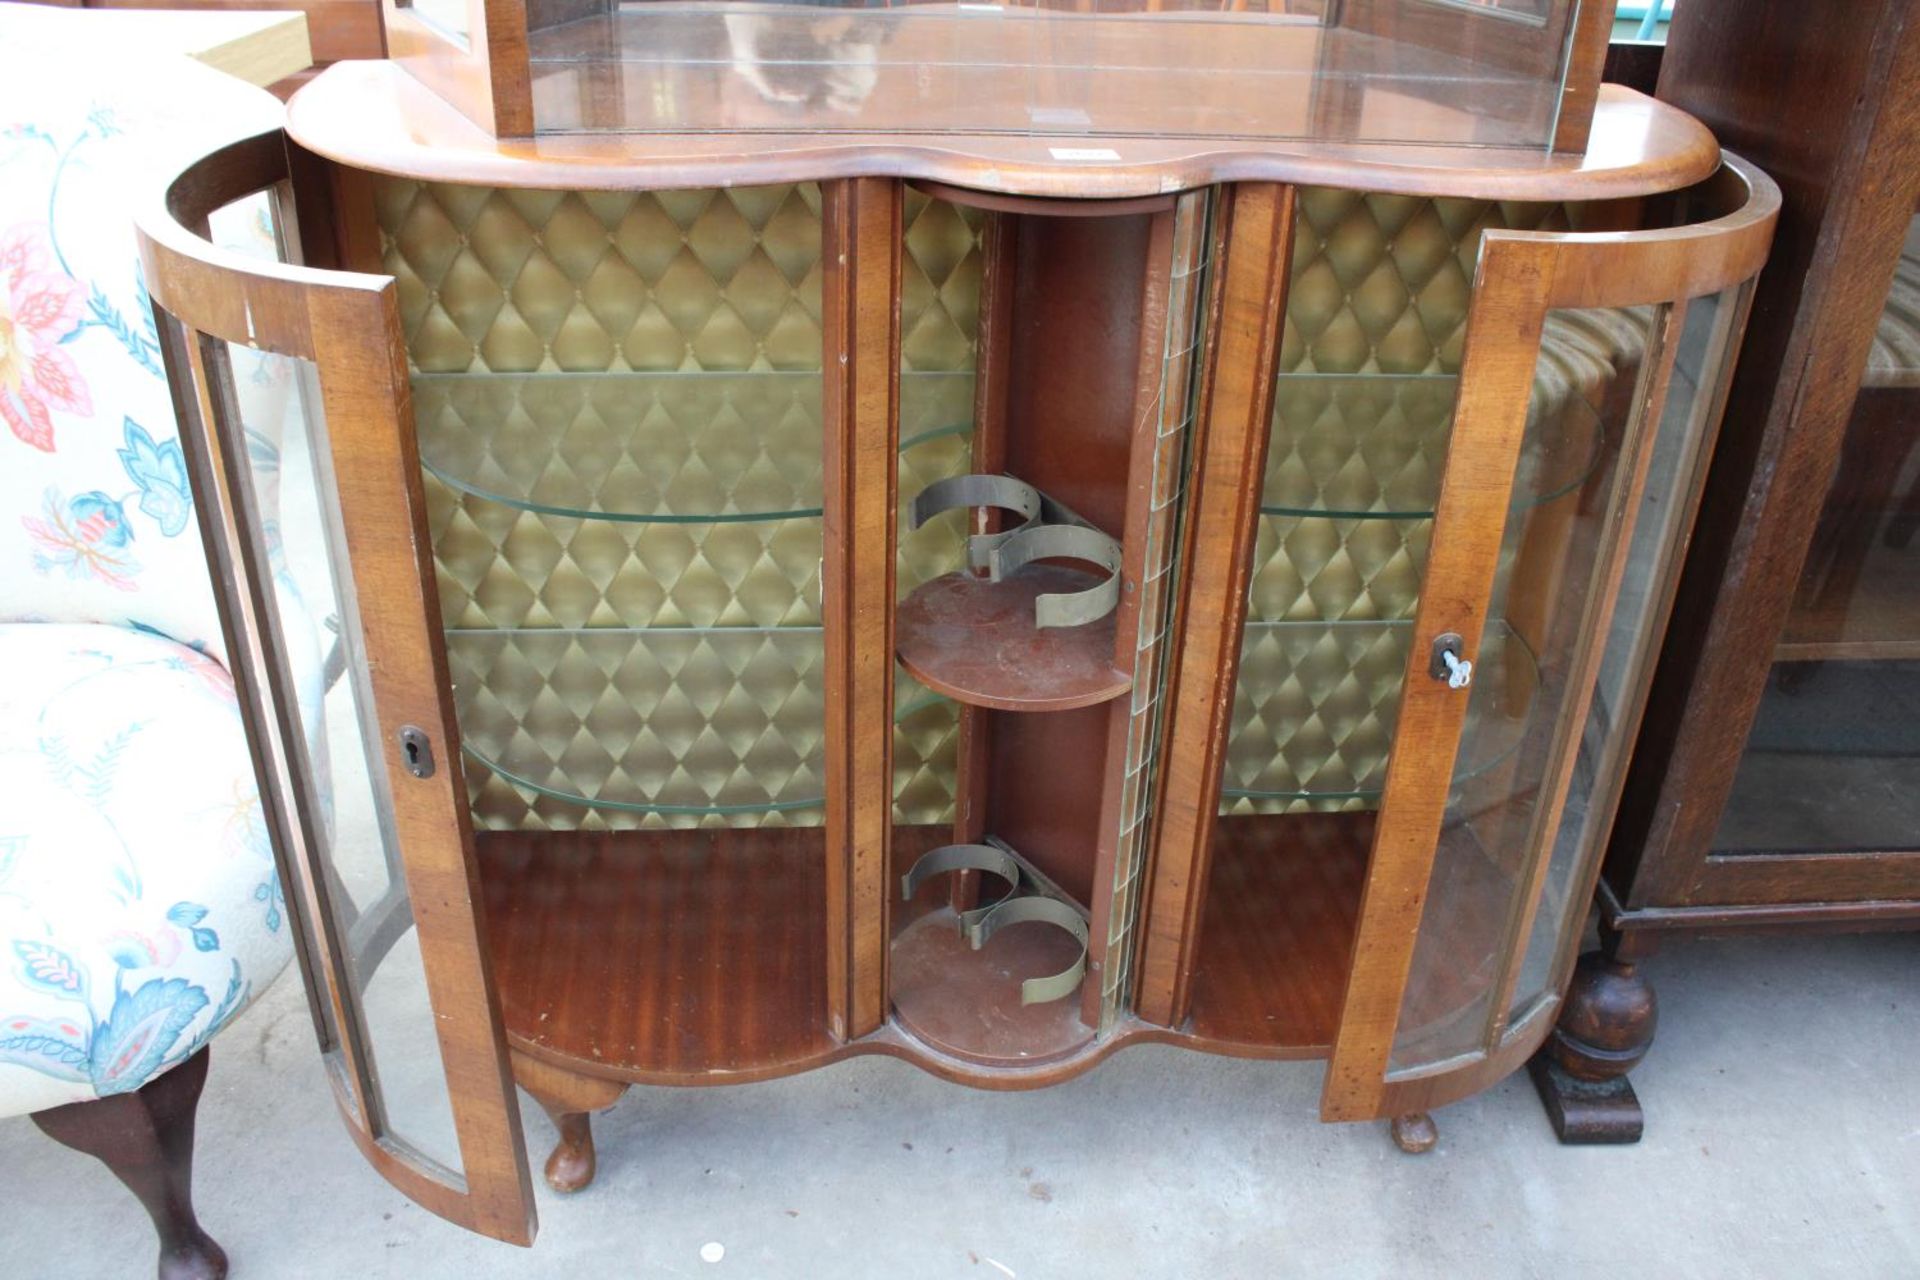 A MID 20TH CENTURY WALNUT DISPLAY CABINET ENCLOSING REVOLVING MIRRORED 4 BOTTLE WINE RACK, 40" WIDE - Image 3 of 3